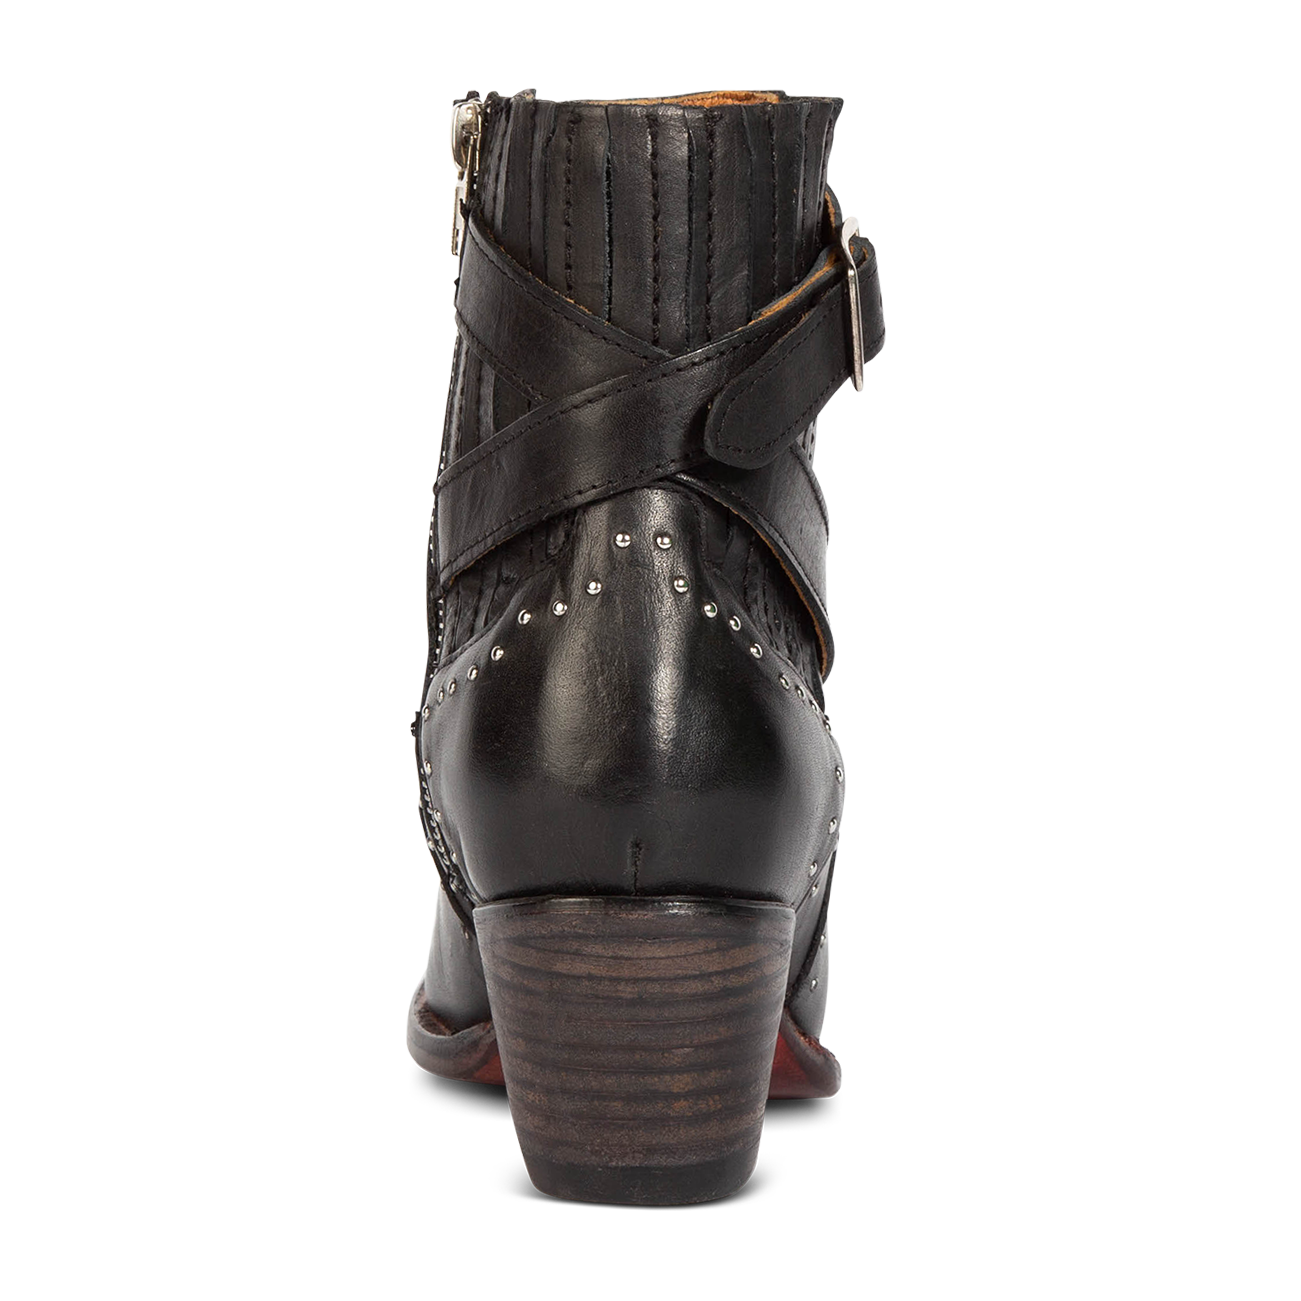 Back view showing wooden heel, gore detailing, and buckle straps on FREEBIRD women's Morgan black leather ankle bootie